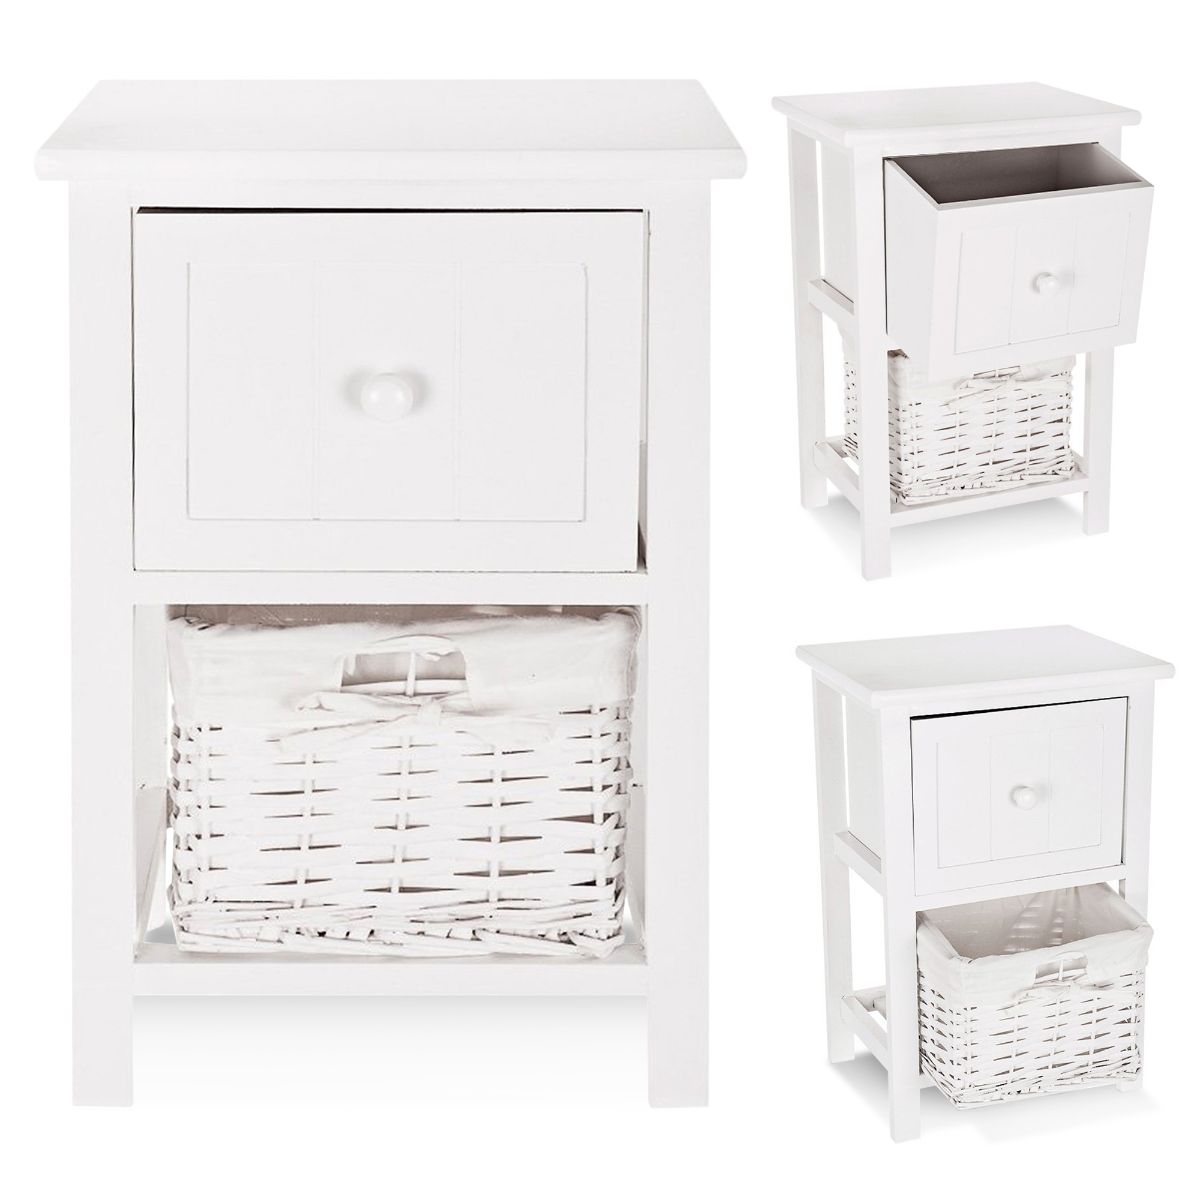 No Assembly Required LIVIVO White Shabby Chic Style Wooden Bedside Cabinet Ready Assembled with Upper Wooden Drawer and Cloth Lined Wicker Storage Basket